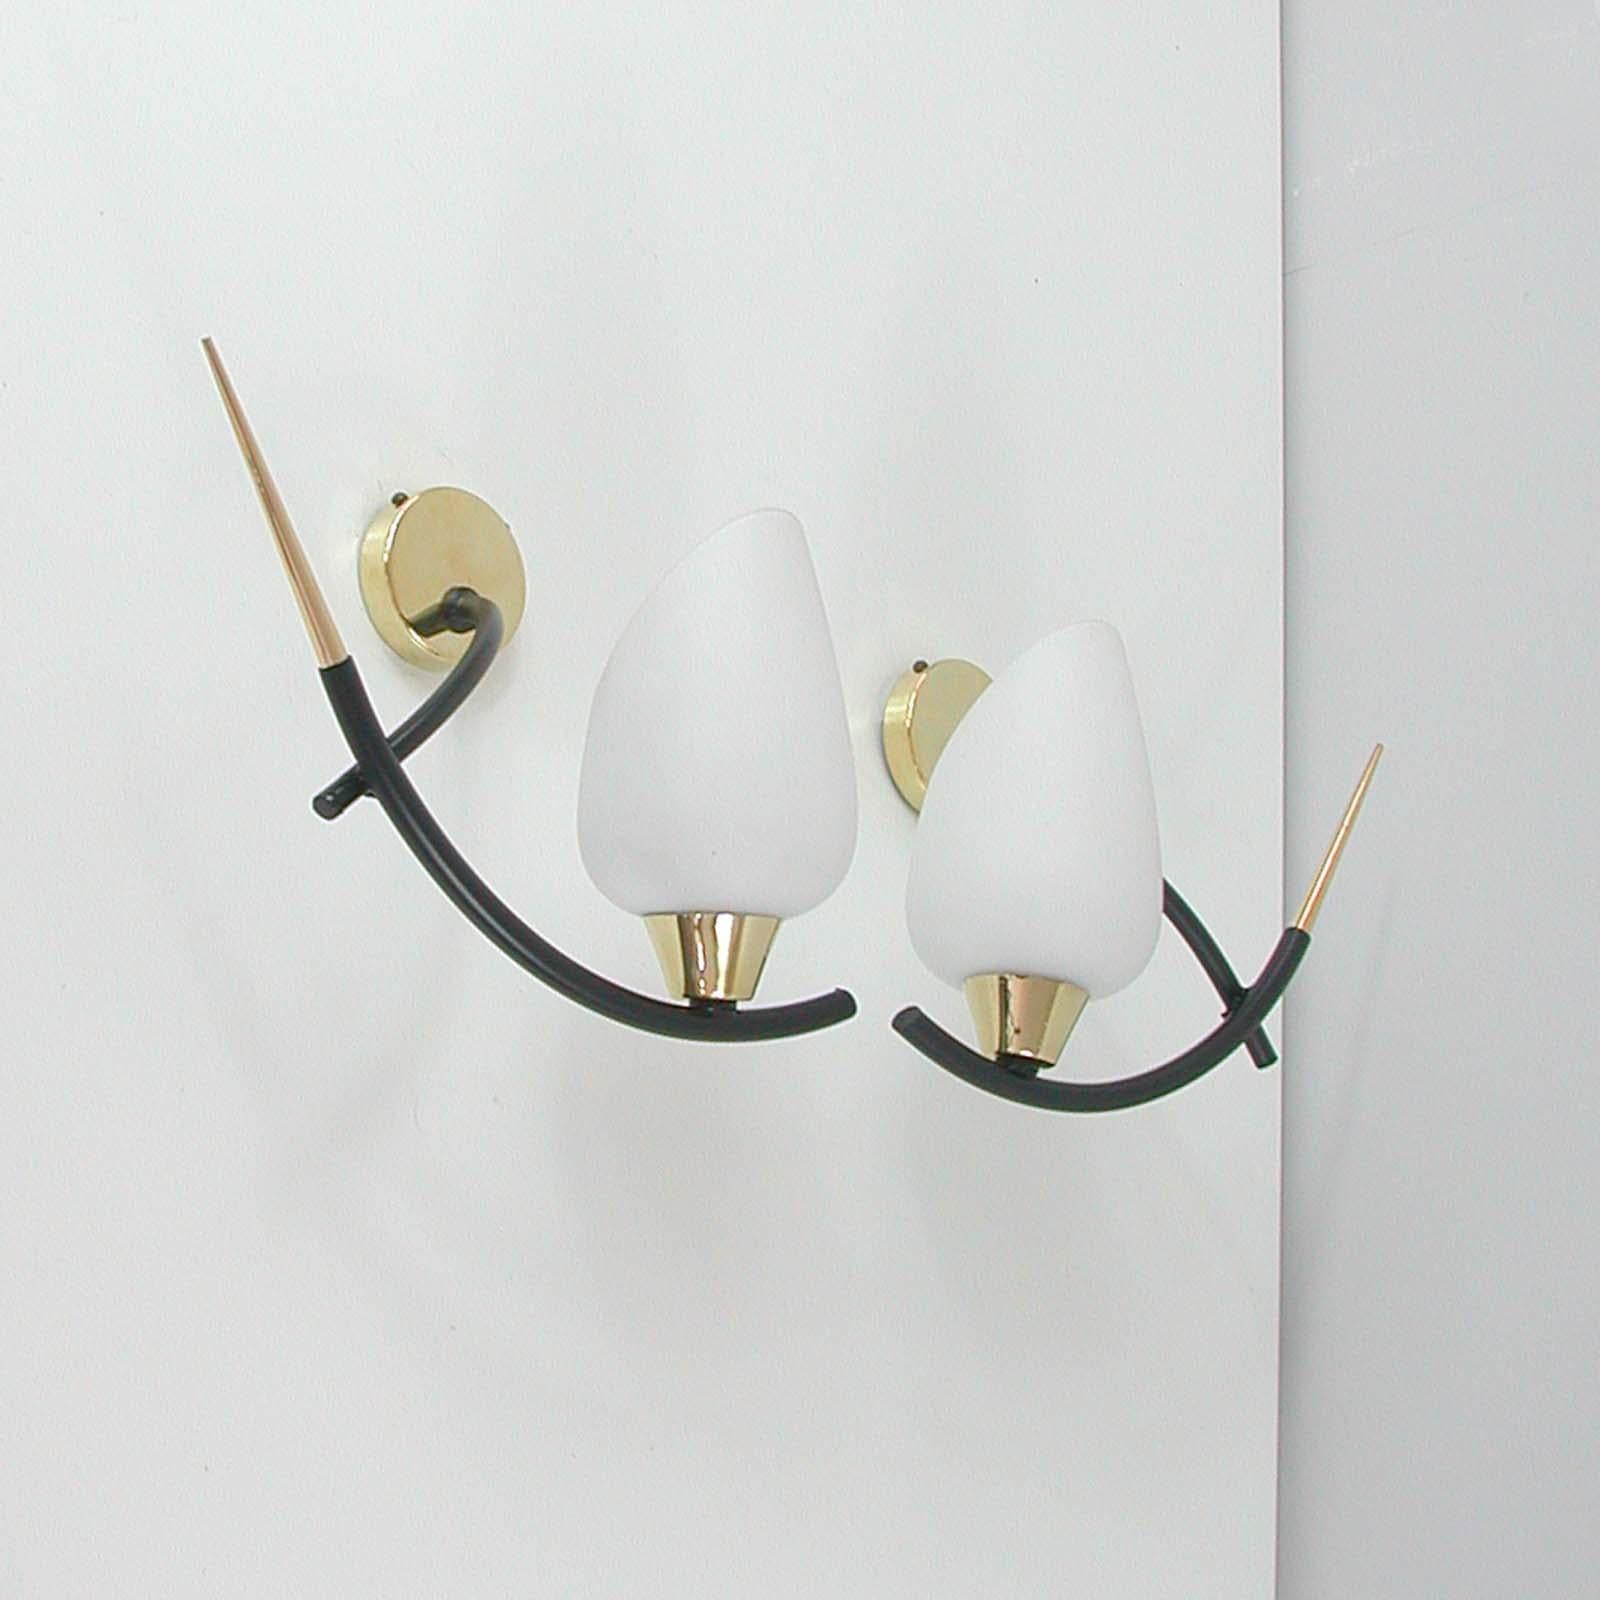 Midcentury French Brass & Opaline Glass Sconces by Maison Arlus, 1950s For Sale 5